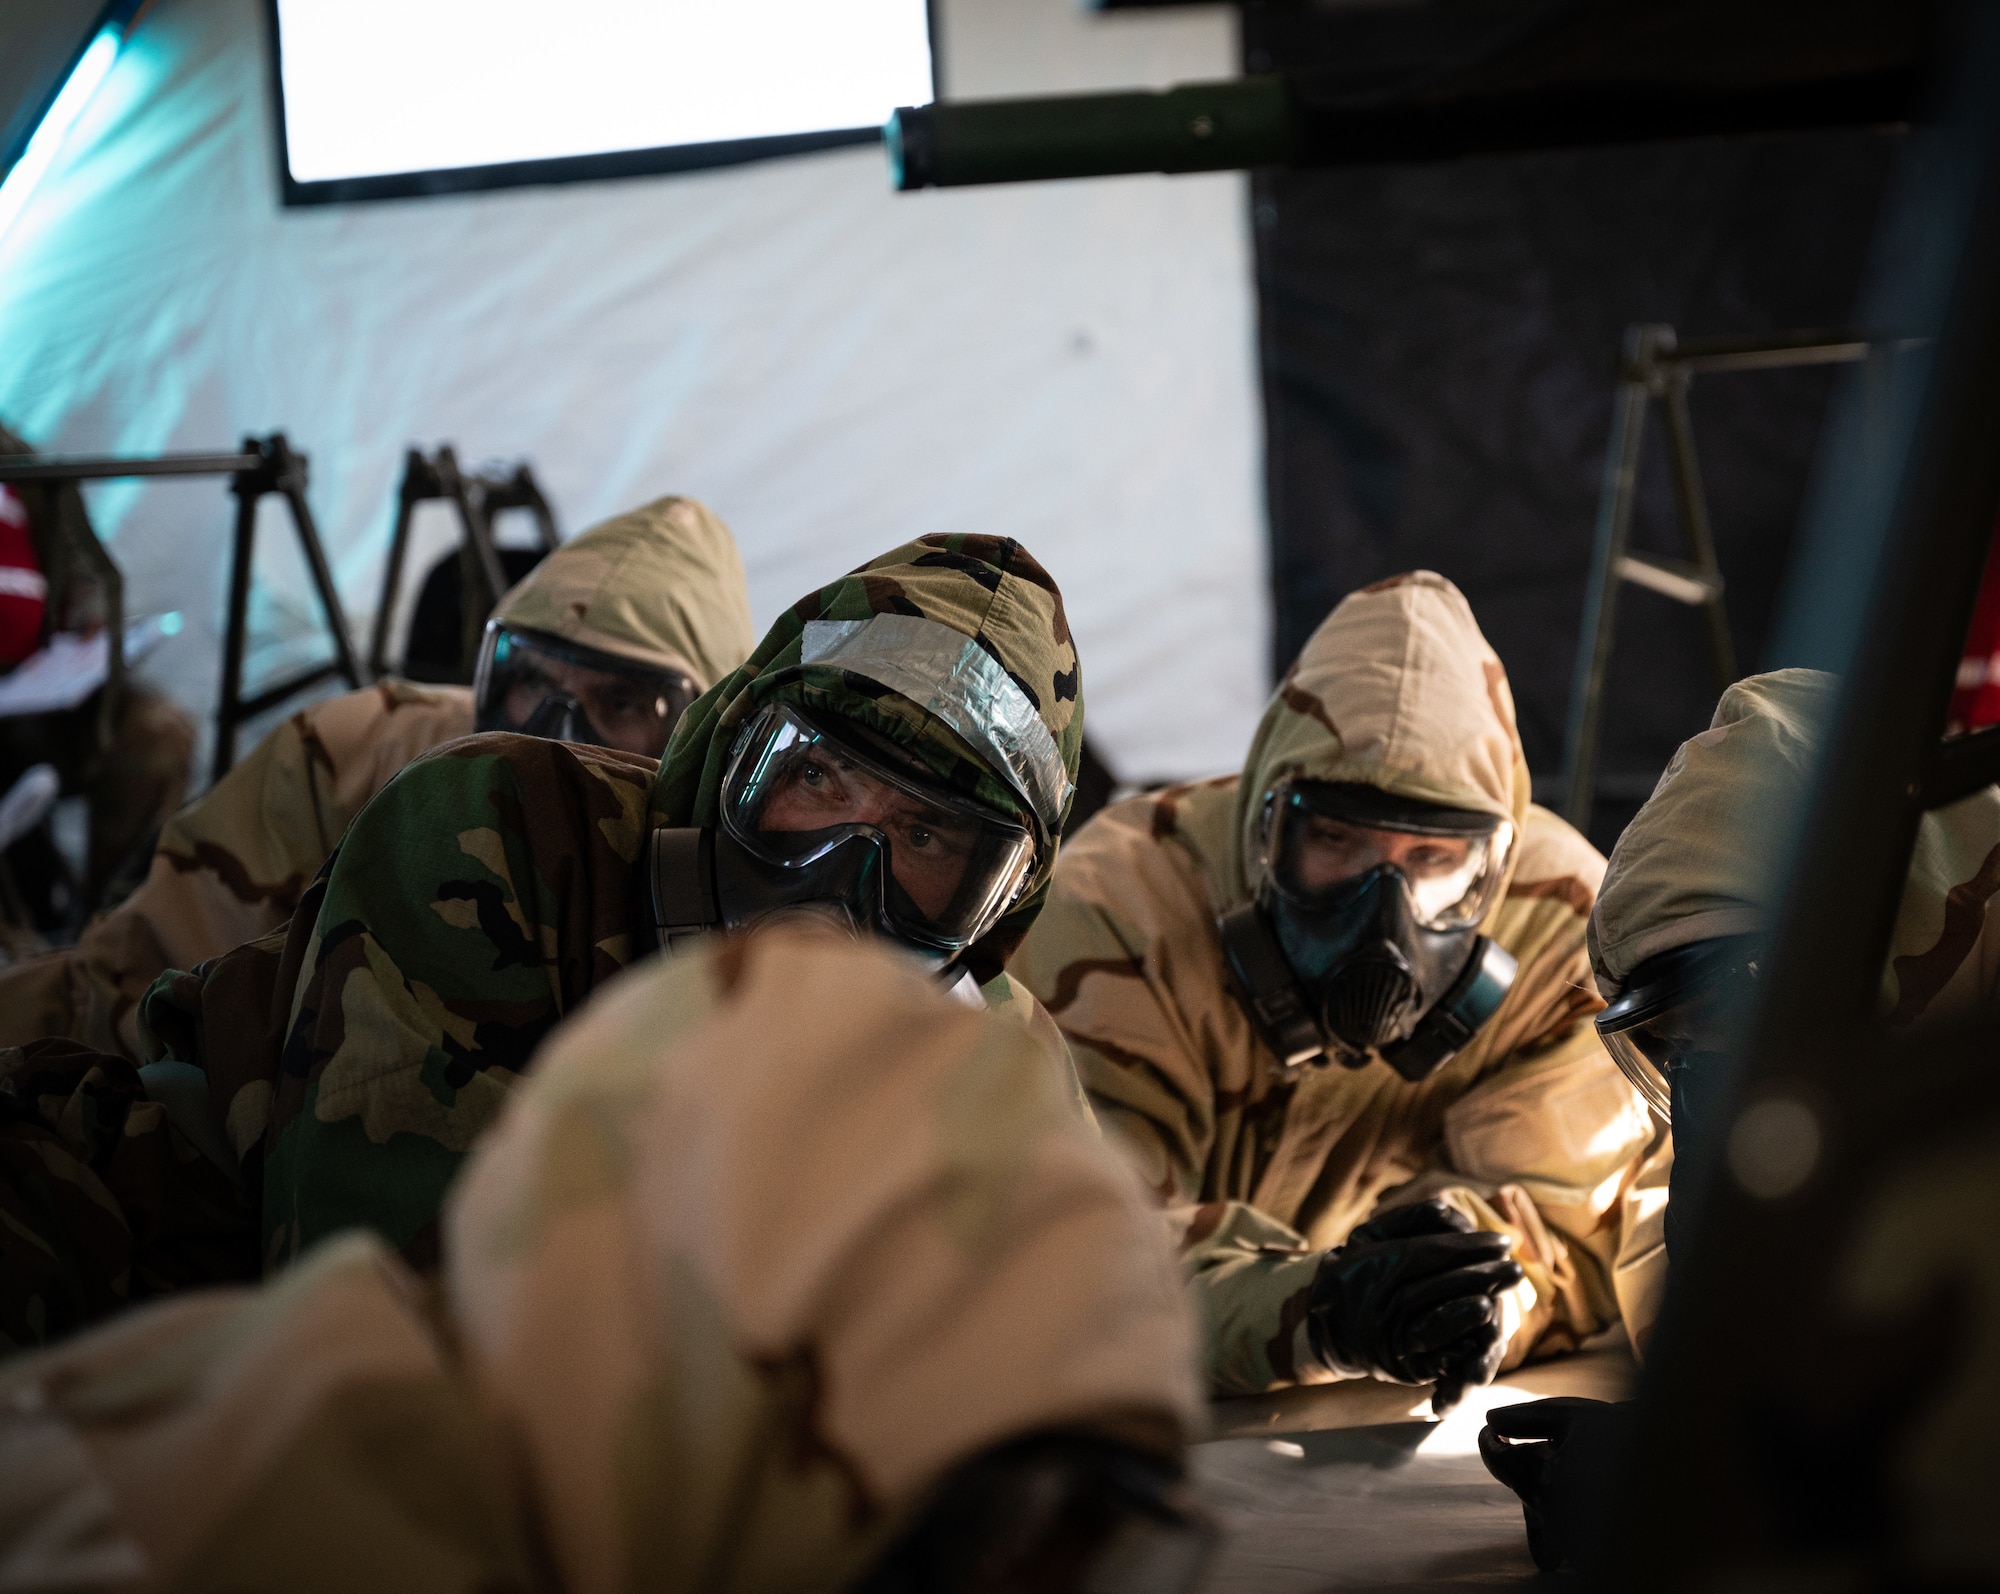 927th Aeromedical Staging Squadron Airmen don mission oriented protective posture gear during a simulated attack in an exercise on MacDill Air Force Base, Fla., Feb 8, 2023. The exercise allowed Airmen to hone fundamental skills such as chemical, biological, radiological and nuclear response, increasing full-spectrum readiness. (U.S. Air Force photo by Tech. Sgt. Bradley Tipton)